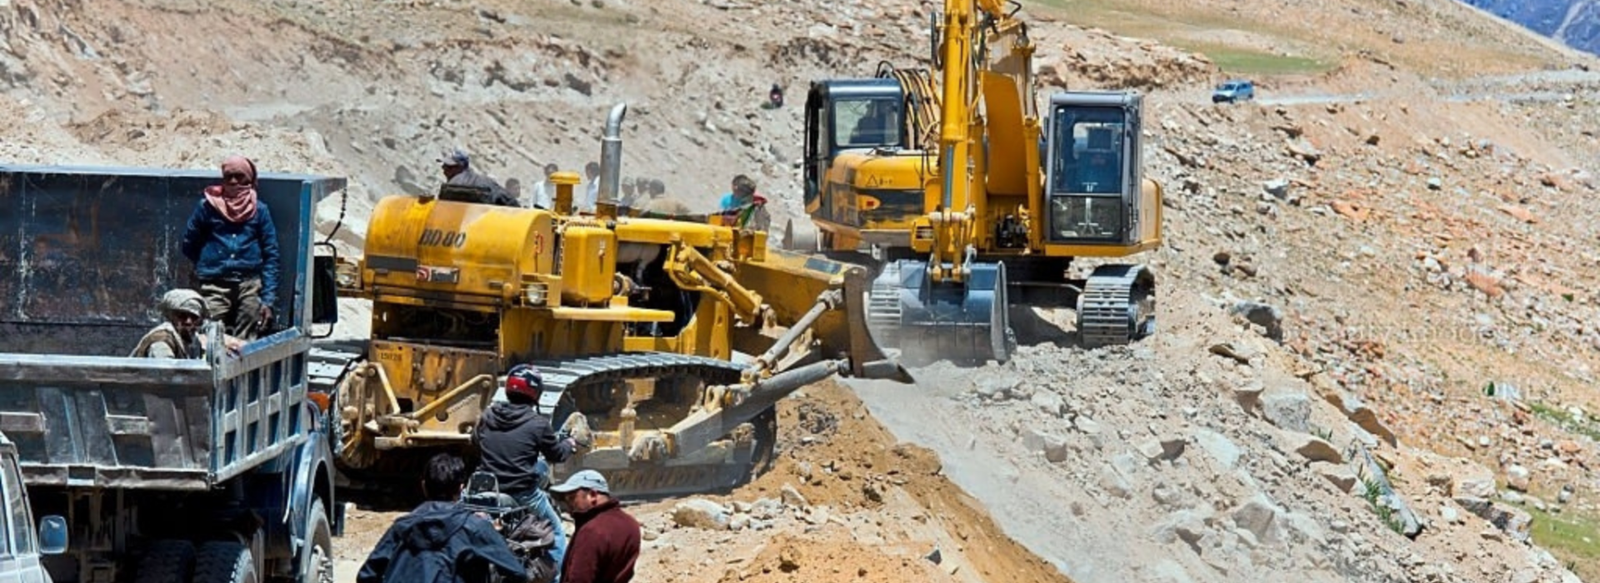 Construction of High - Altitude Hill Road to Indo – China Border from Umlungzing to ITBP Post Umlungzing in the Union Territory of Ladakh for ITBP (Indo – Tibetan Border Police)